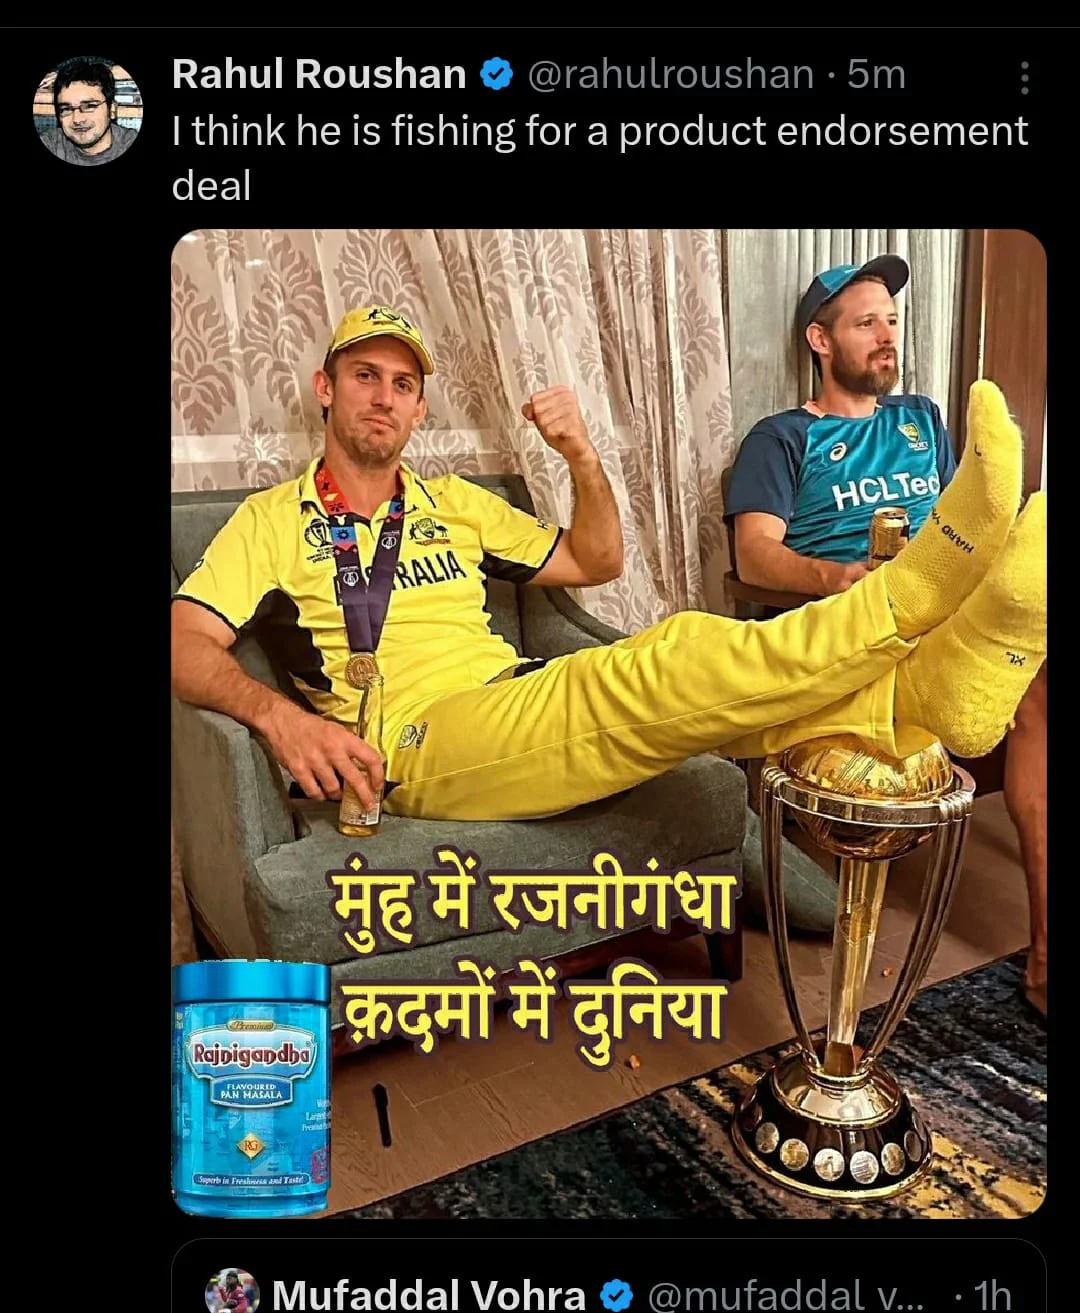 IND vs AUS: Fans Troll Mitchell Marsh For Putting Feet On World Cup Trophy